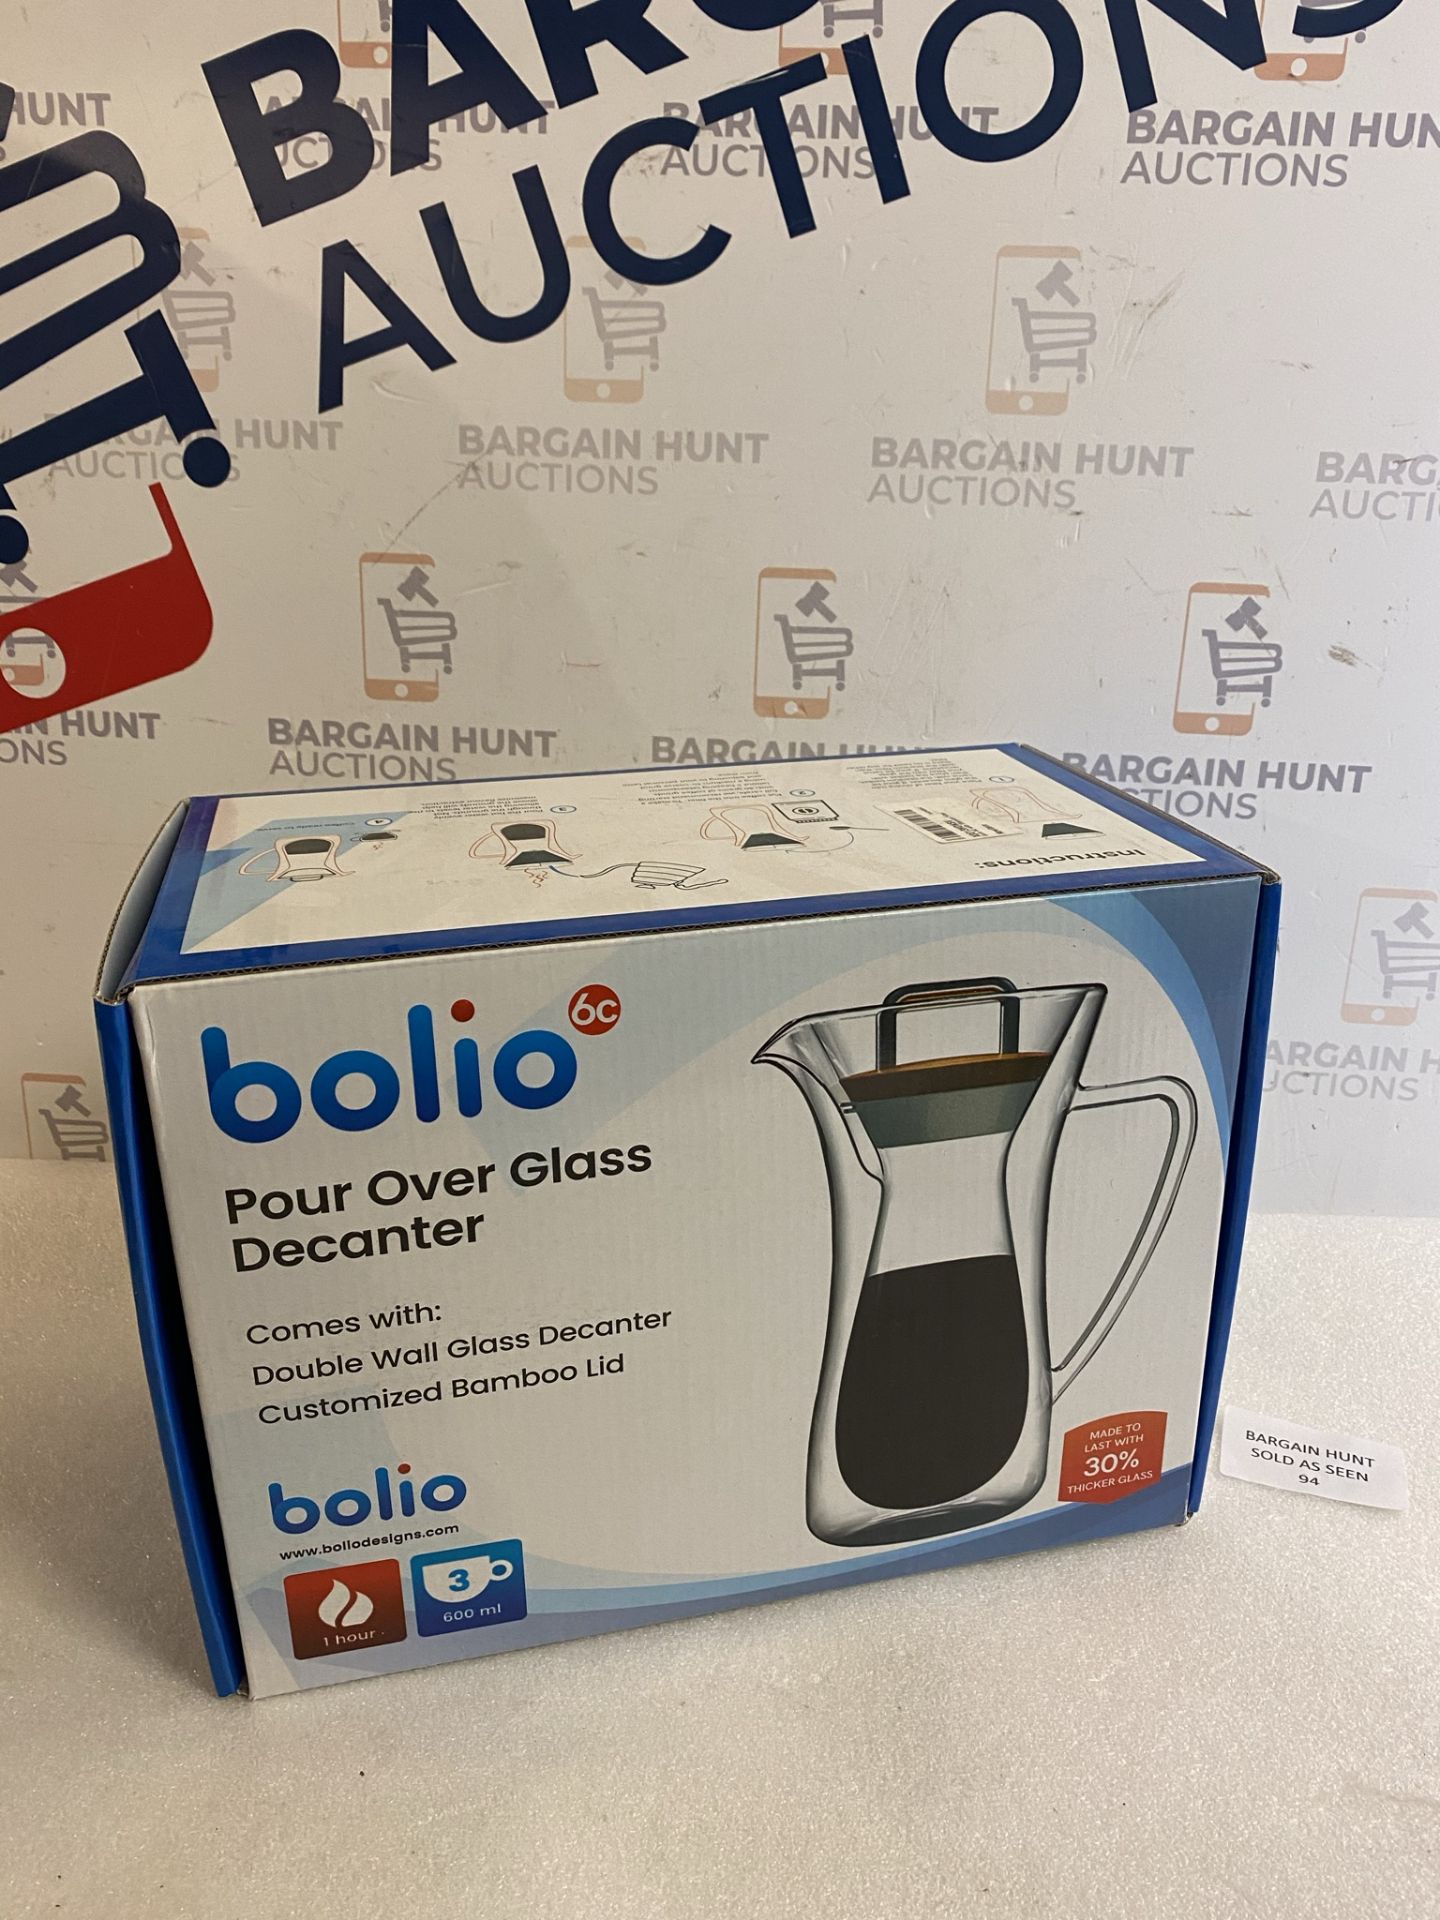 Bolio Pour Over Double Wall Glass Decanter RRP £39.99 - Image 2 of 2